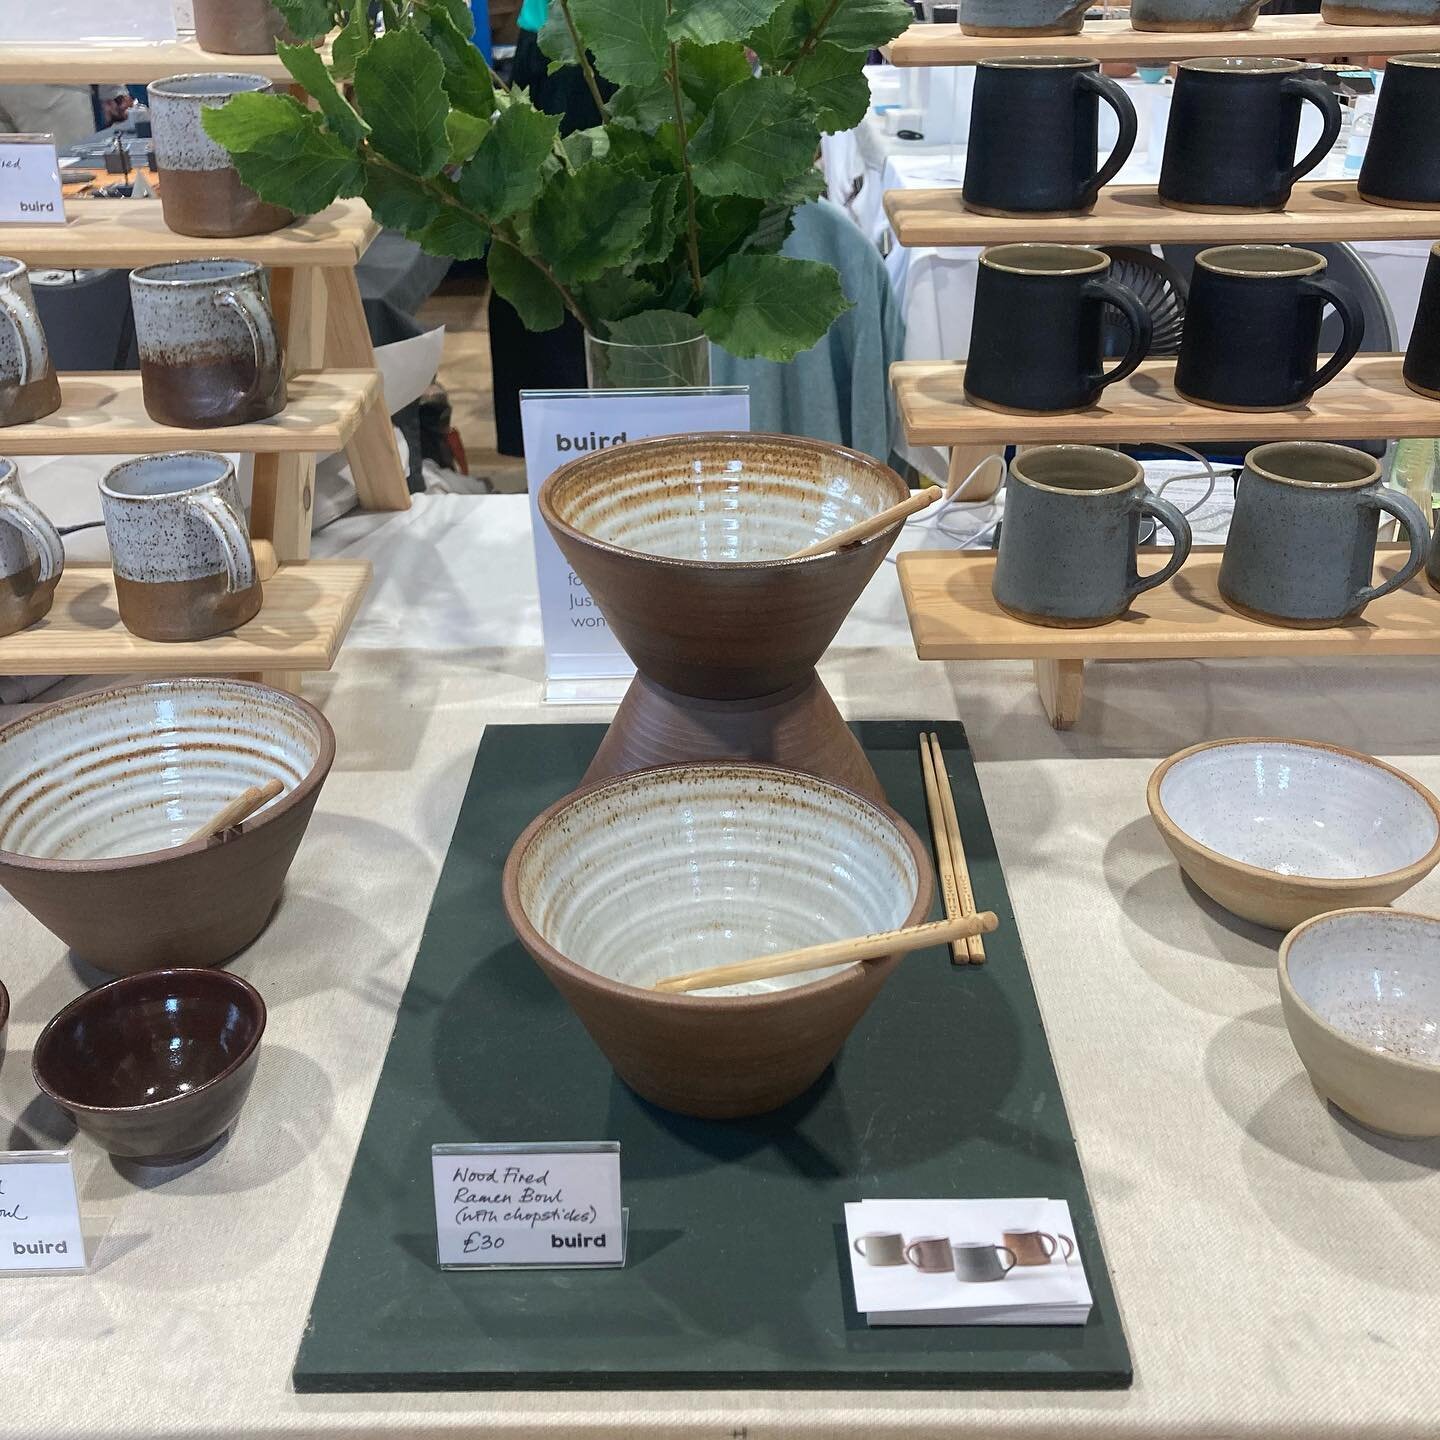 Day 2 of @wirksworthfestival Art &amp; Architecture Trail today. You can find us in the Maker&rsquo;s Market in Wirksworth Town Hall 😀
.
.
#wirksworthfestival 
#derbyshirepottery 
#woodfiredceramics 
#stonewaretableware